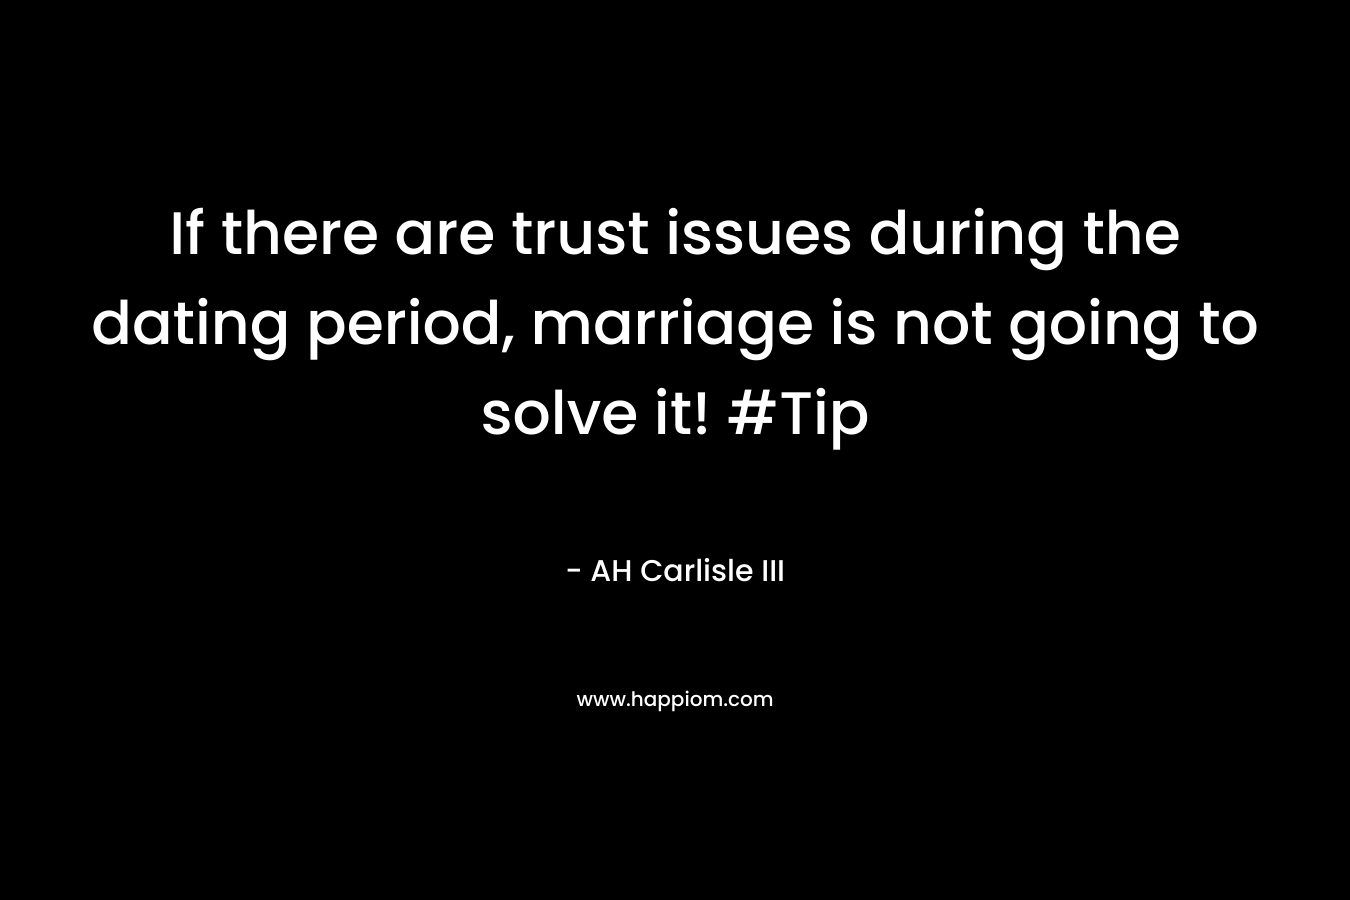 If there are trust issues during the dating period, marriage is not going to solve it! #Tip